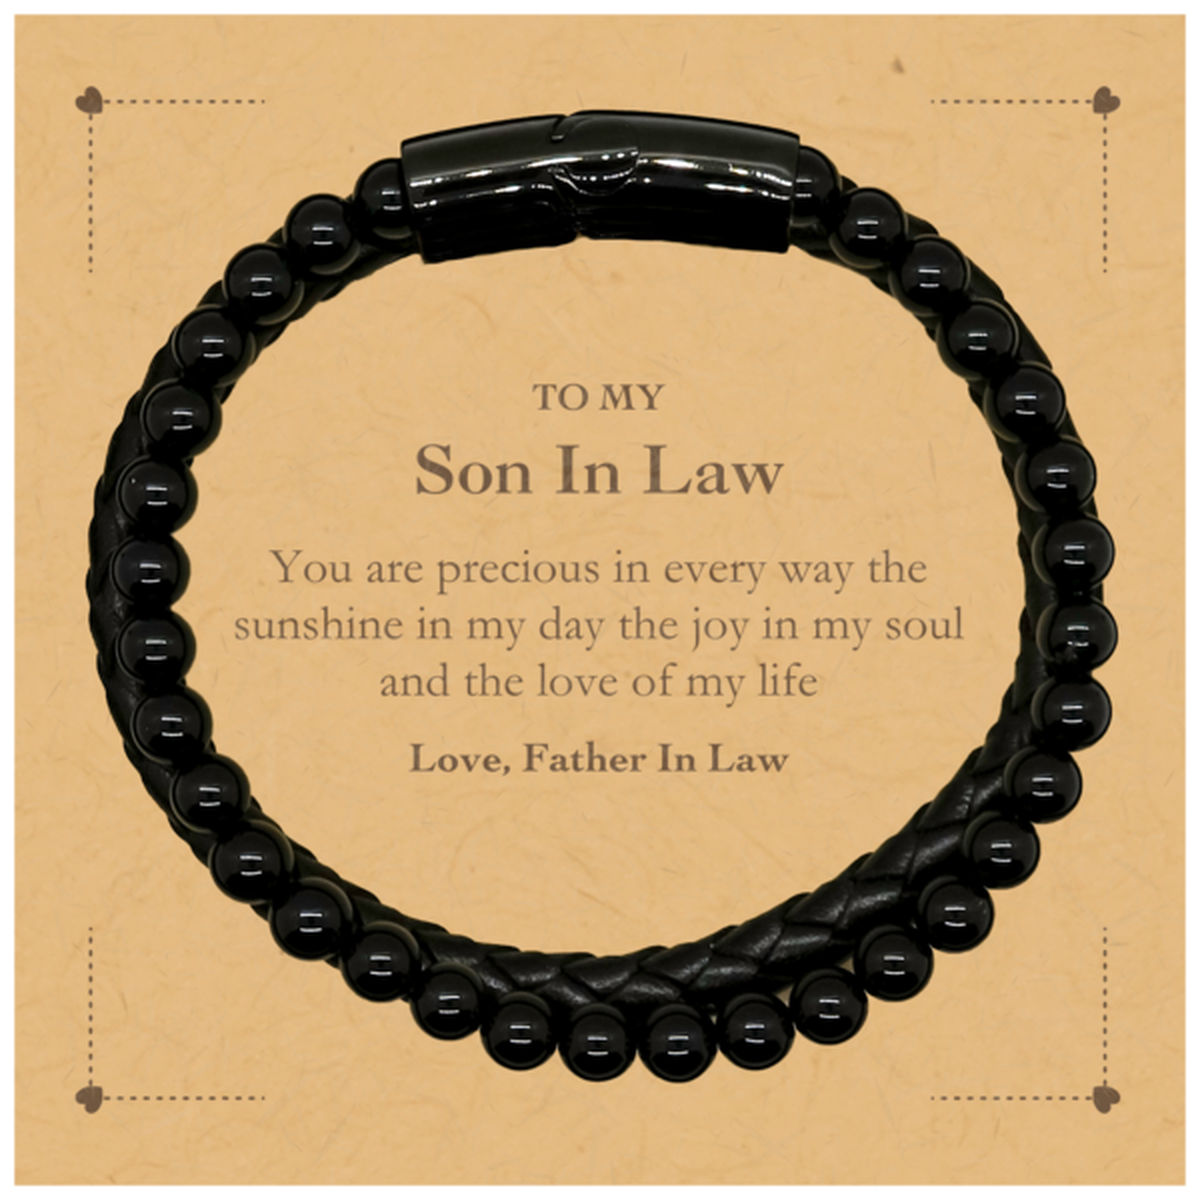 Graduation Gifts for Son In Law Stone Leather Bracelets Present from Father In Law, Christmas Son In Law Birthday Gifts Son In Law You are precious in every way the sunshine in my day. Love, Father In Law